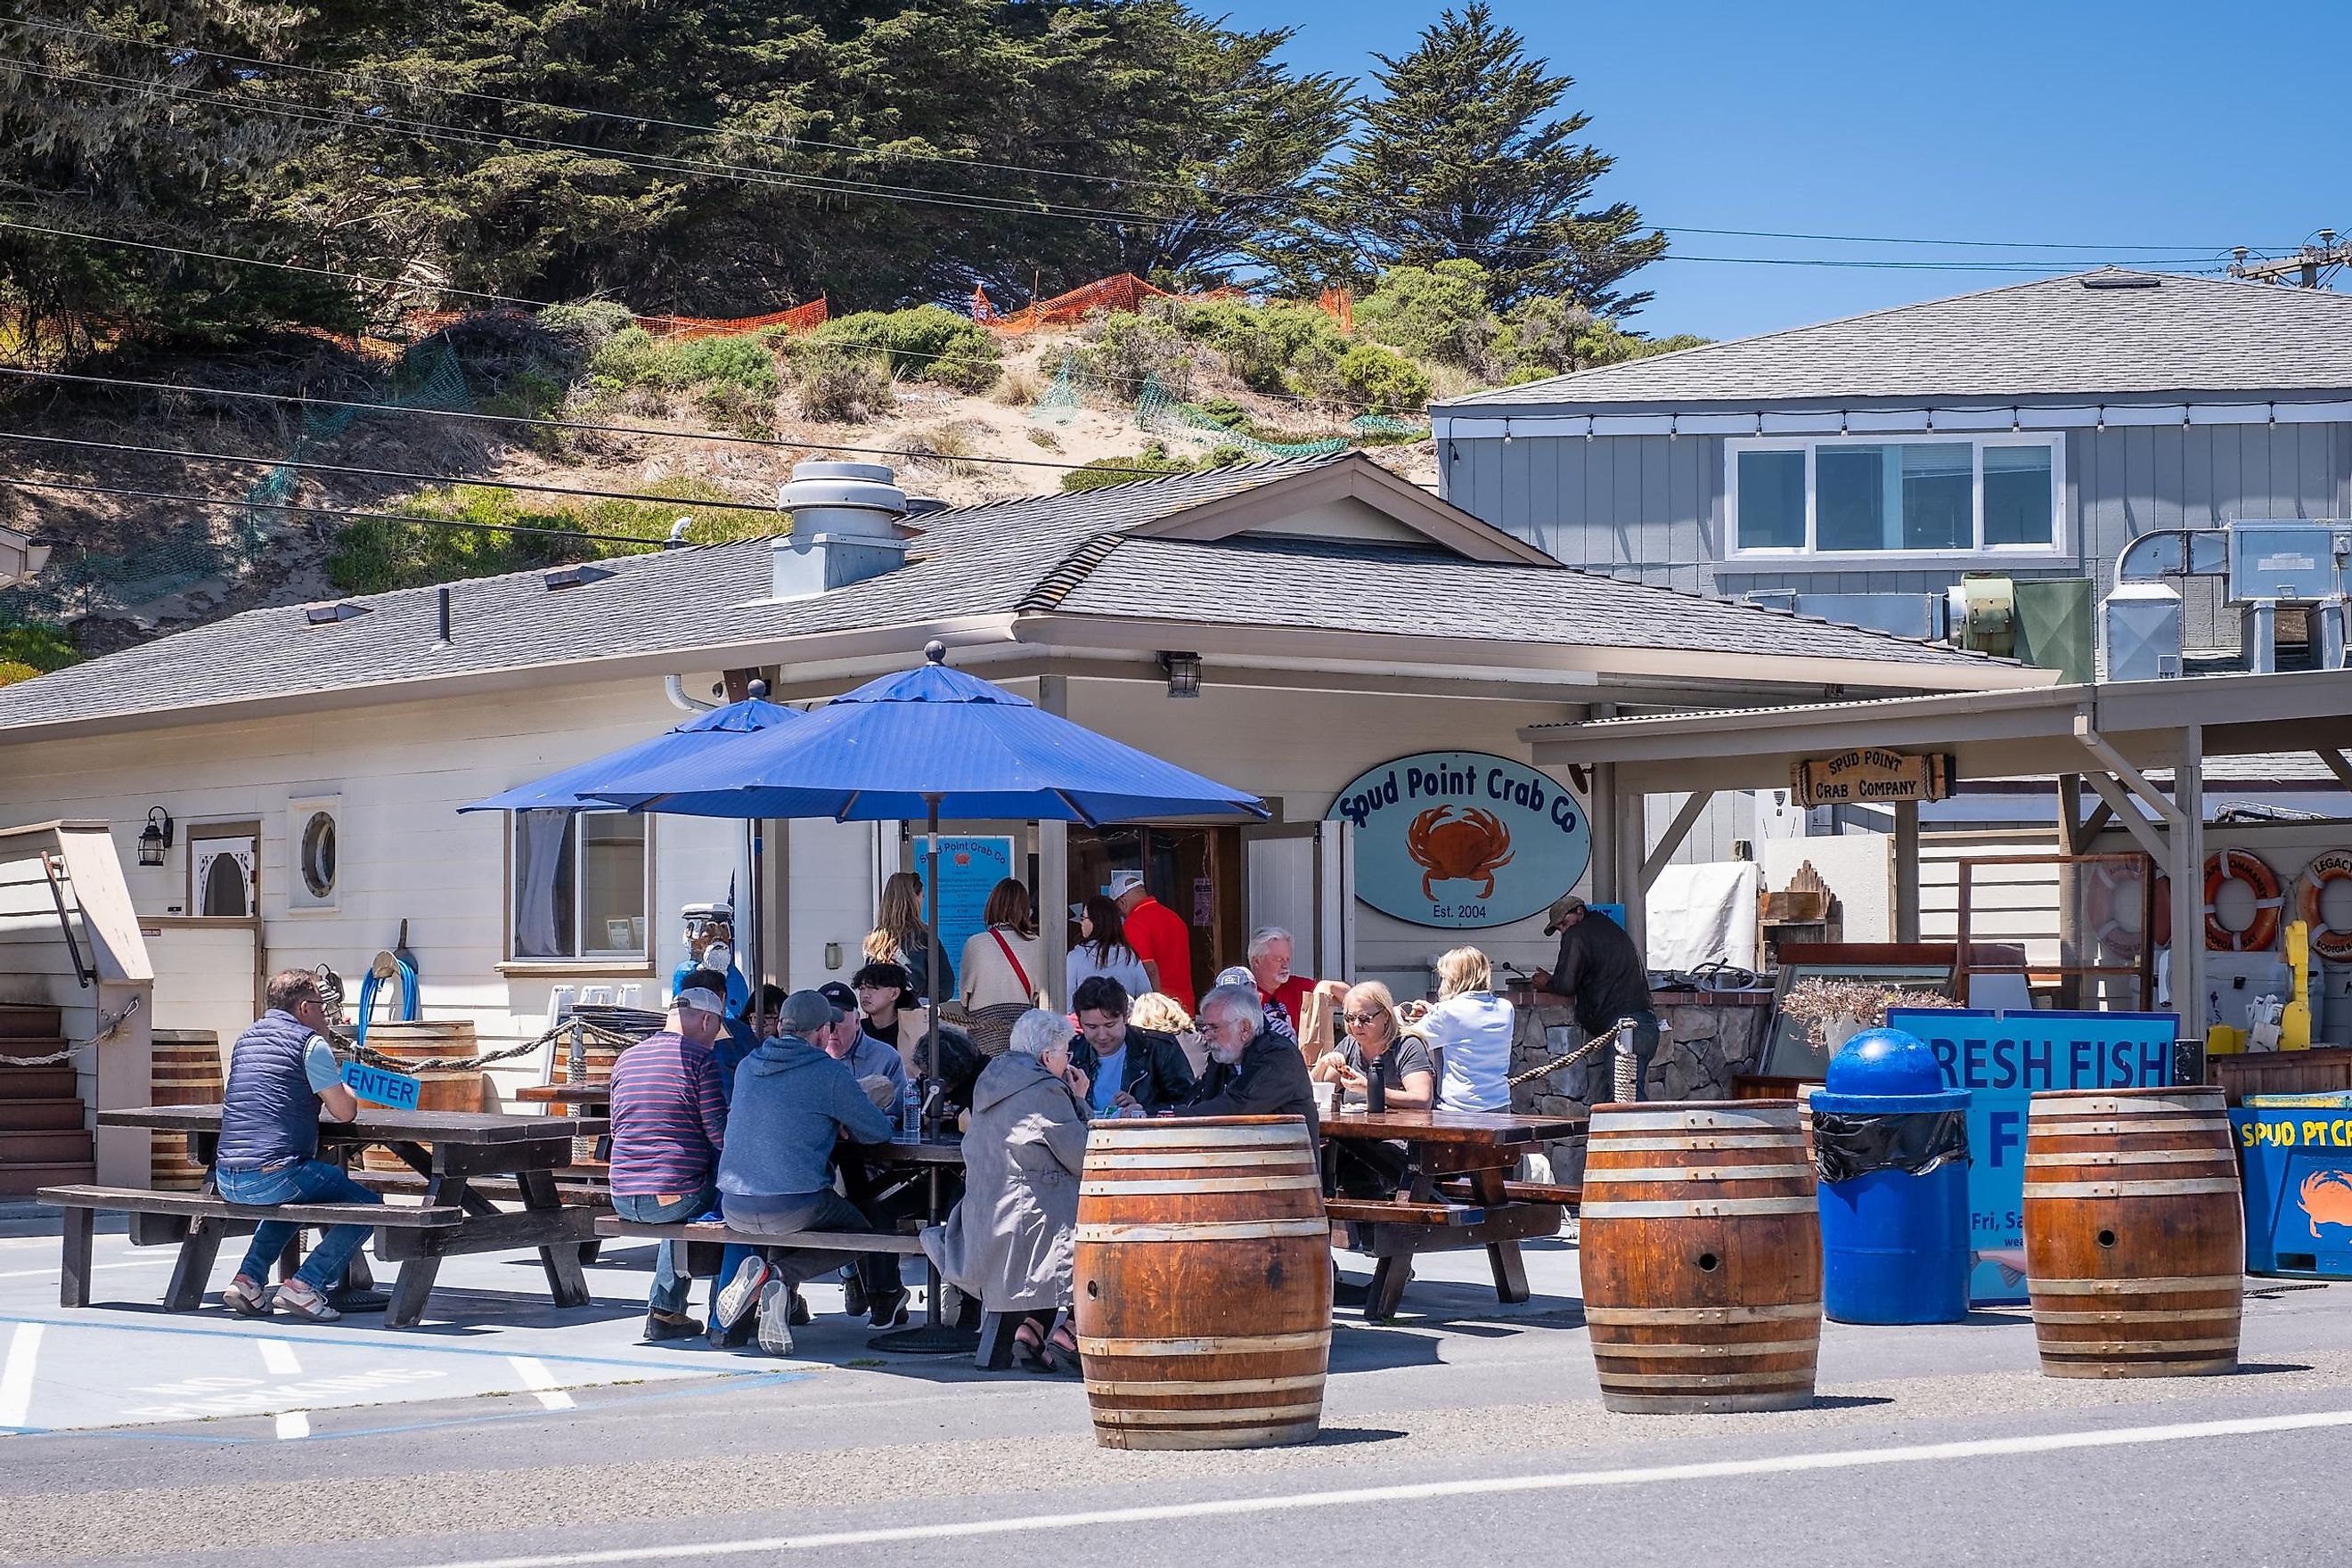 People eating at Spud Point Crab Co. in Bodega Bay, California, via Brycia James / iStock.com